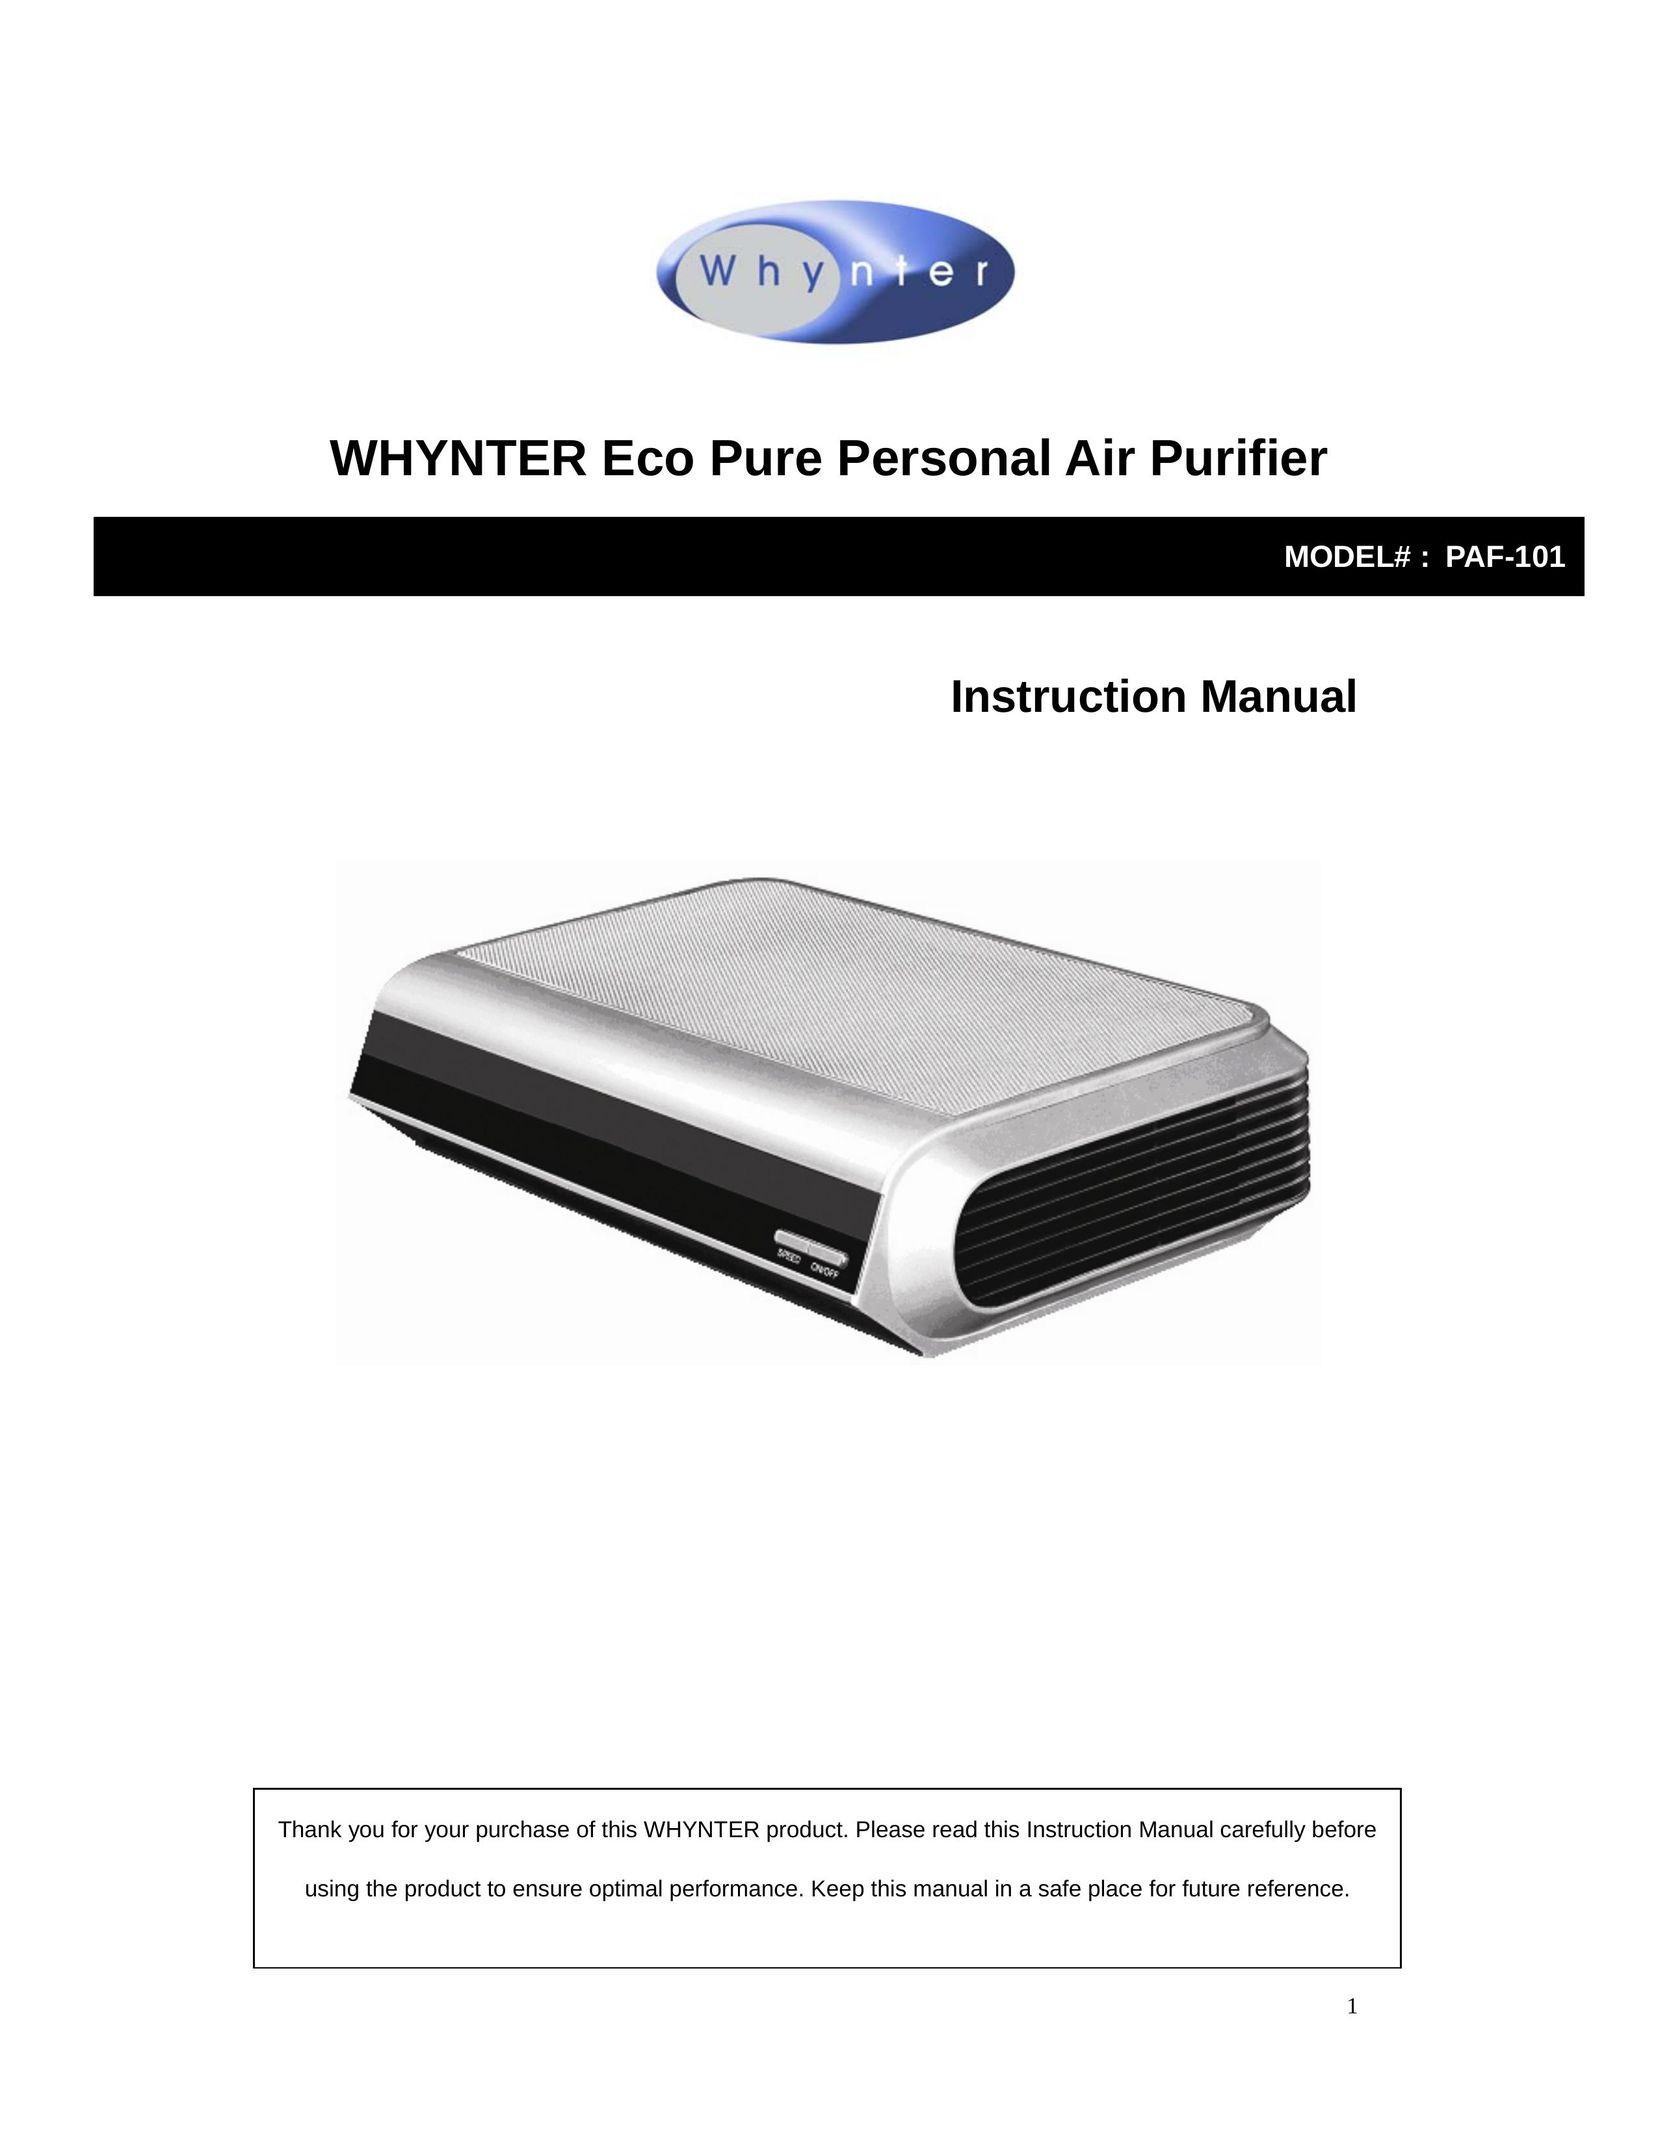 Whynter PAF-101 Air Cleaner User Manual